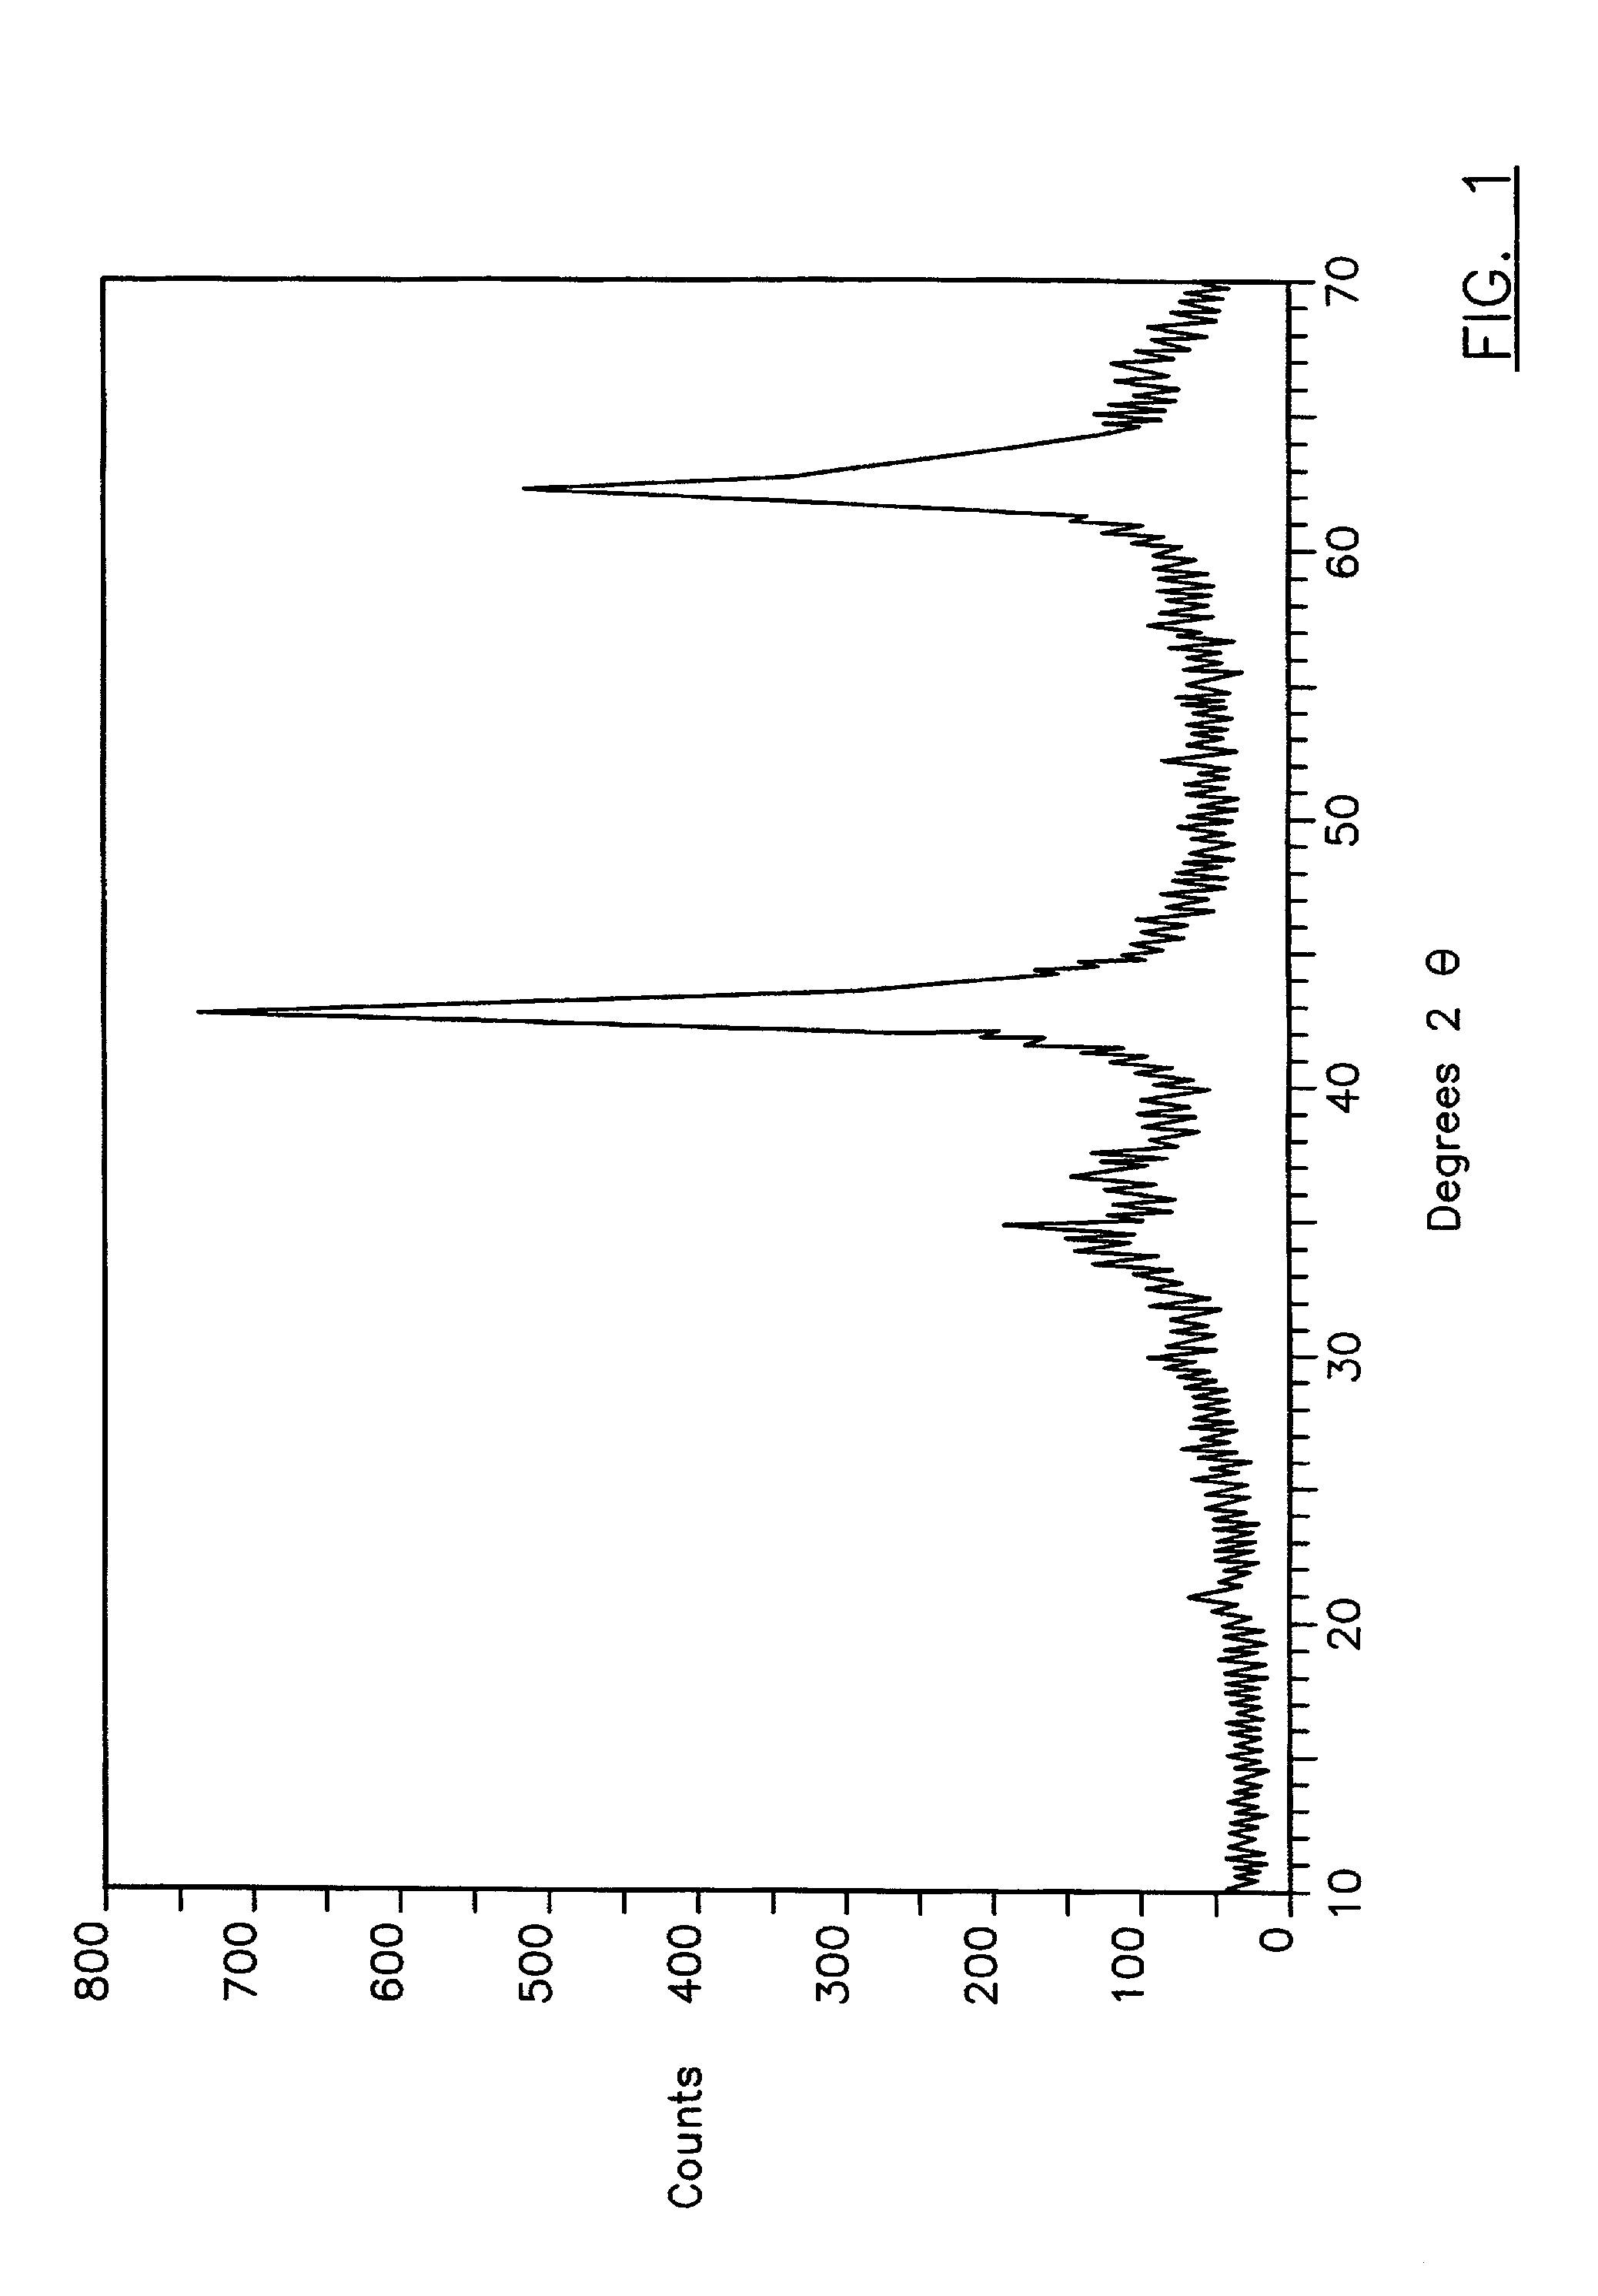 Rheology modified compositions and modification agents